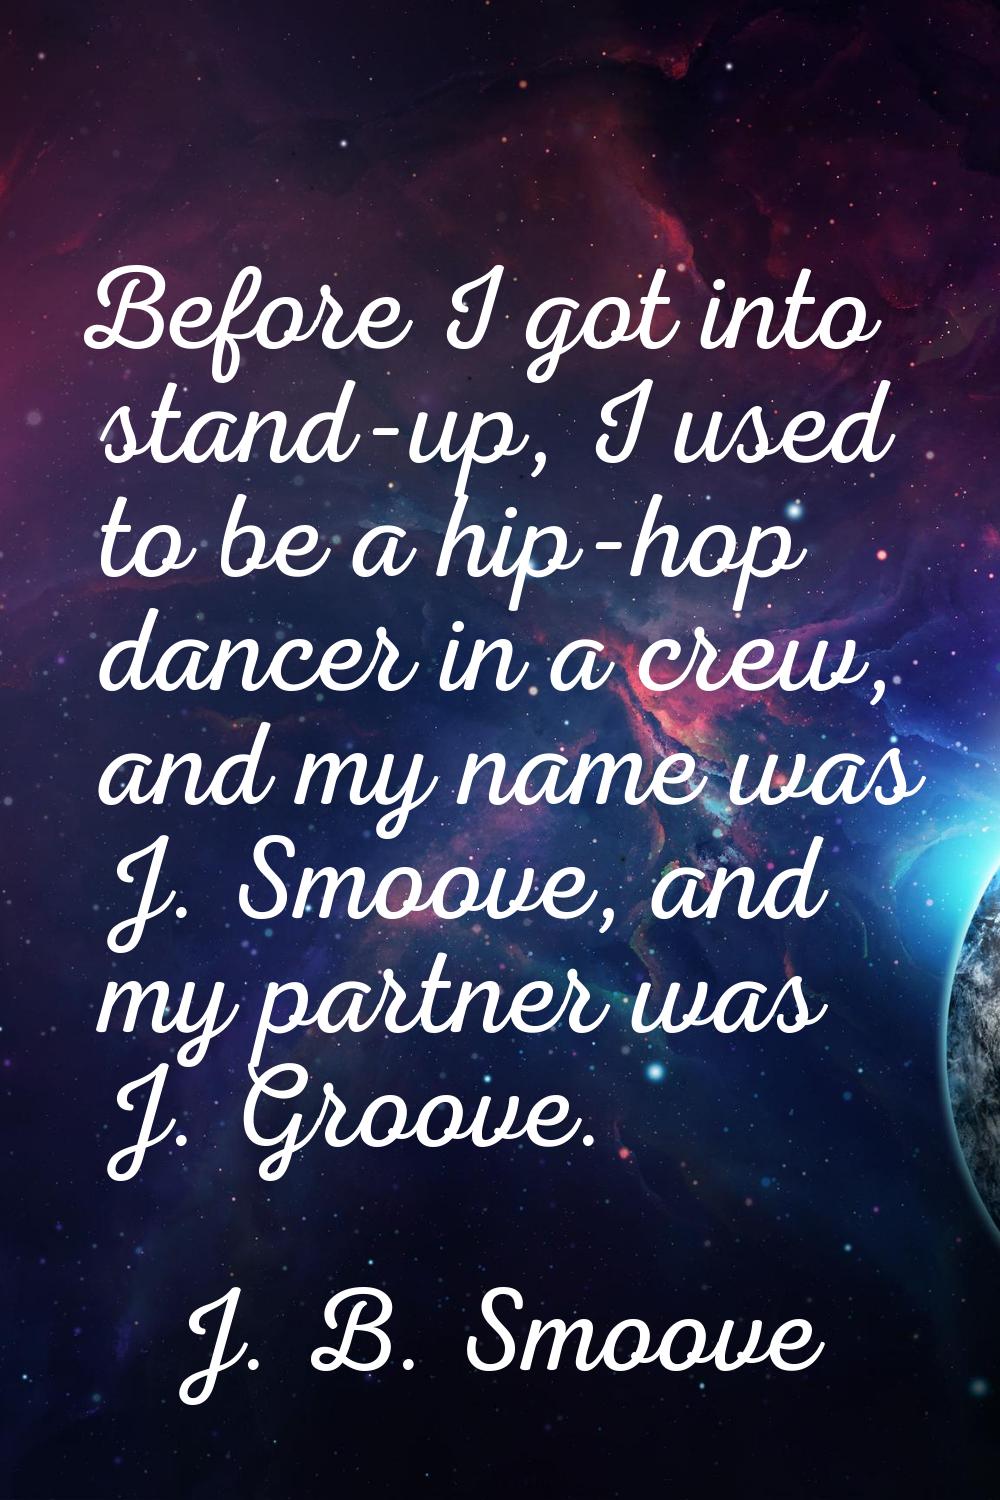 Before I got into stand-up, I used to be a hip-hop dancer in a crew, and my name was J. Smoove, and